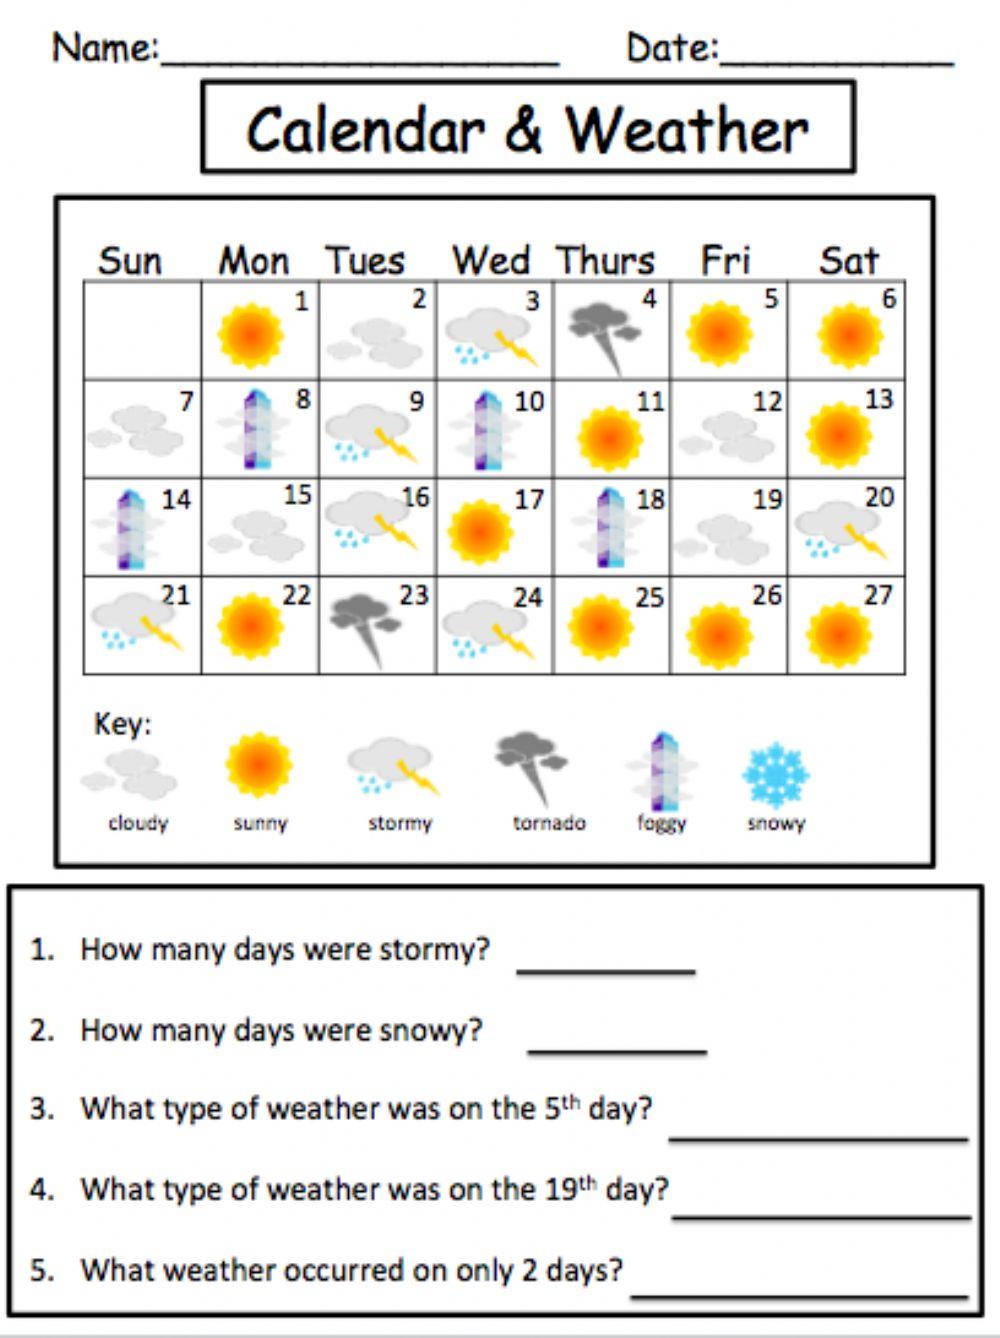 Calendar and Weather